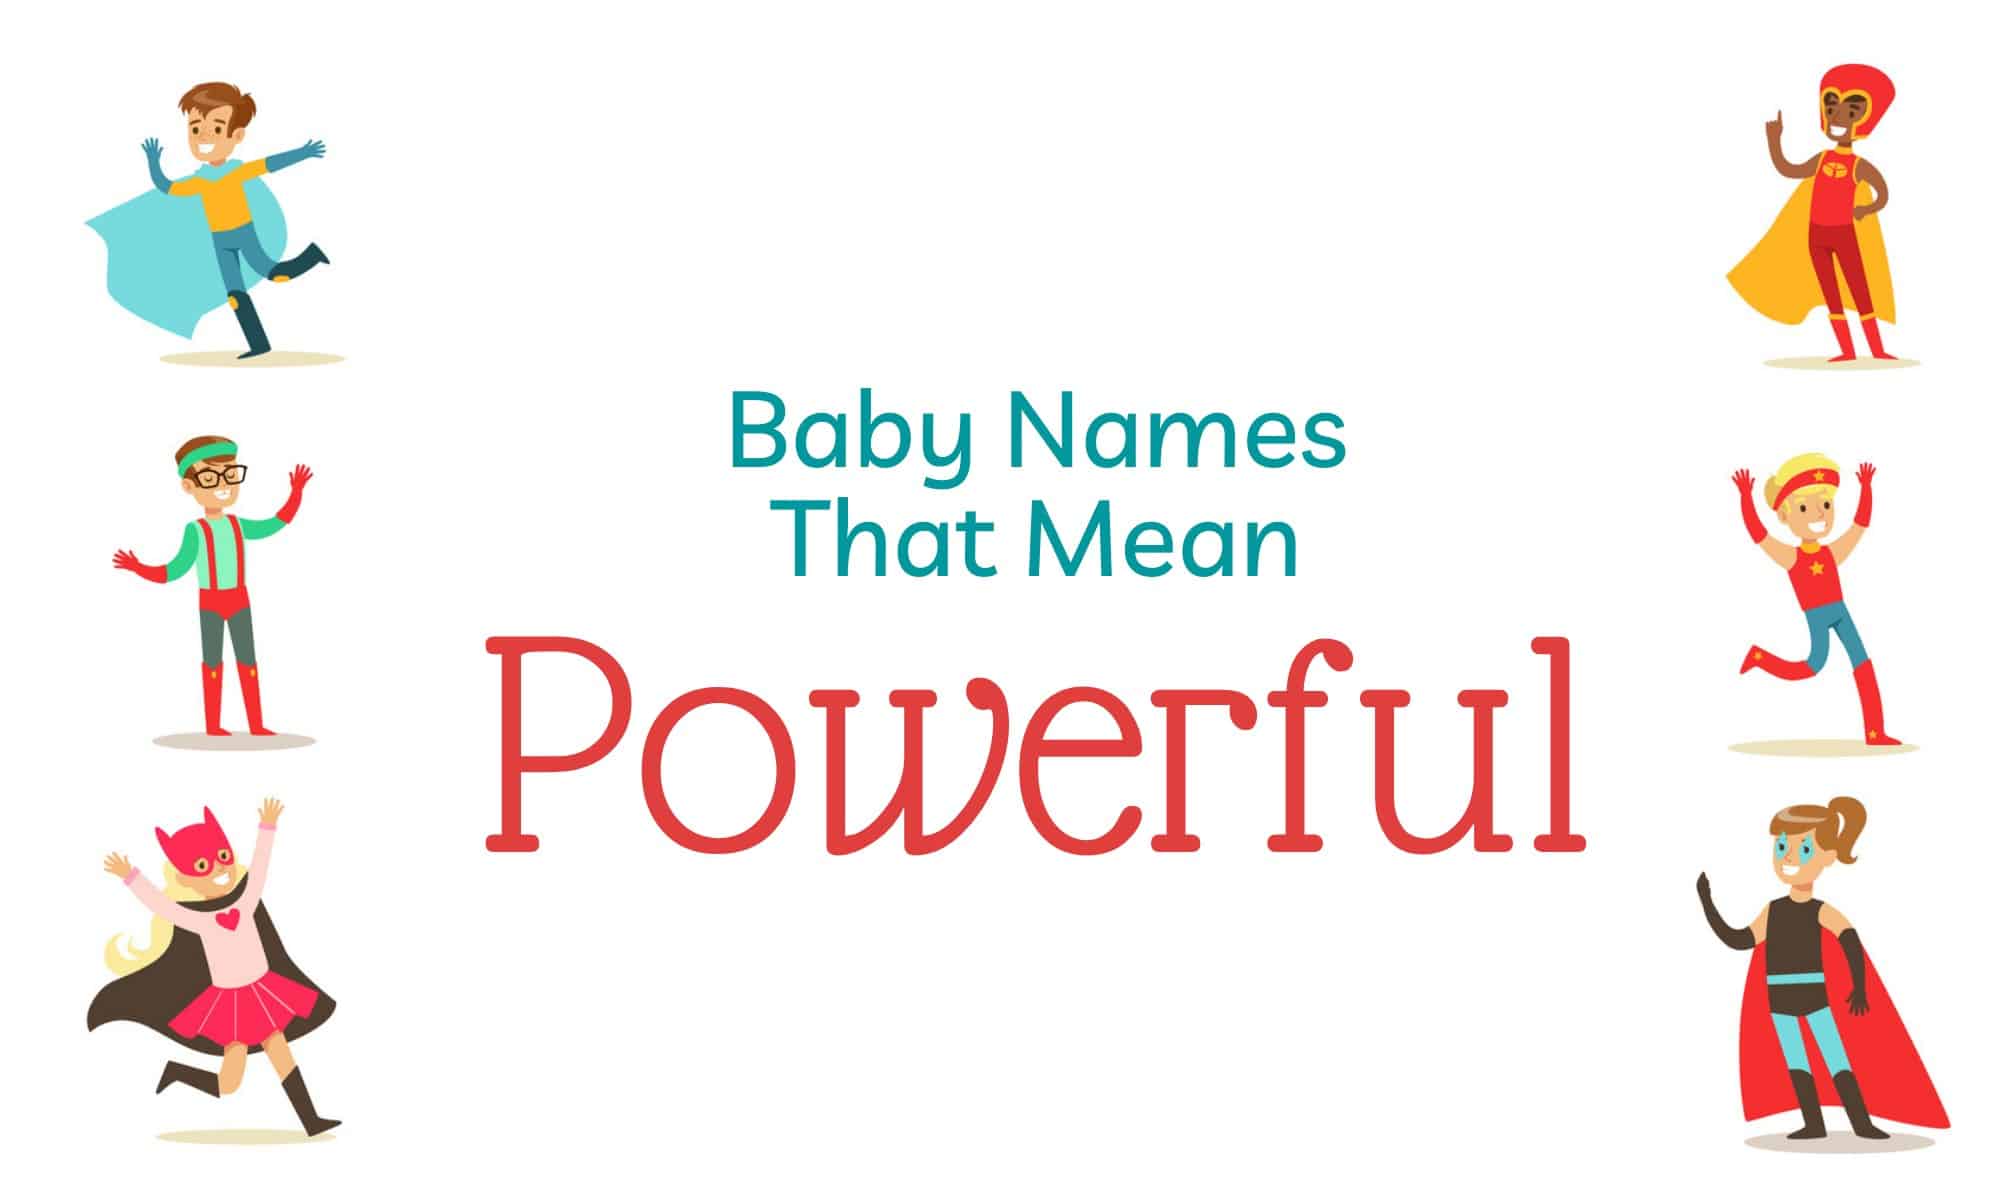 Baby Names That Mean Powerful